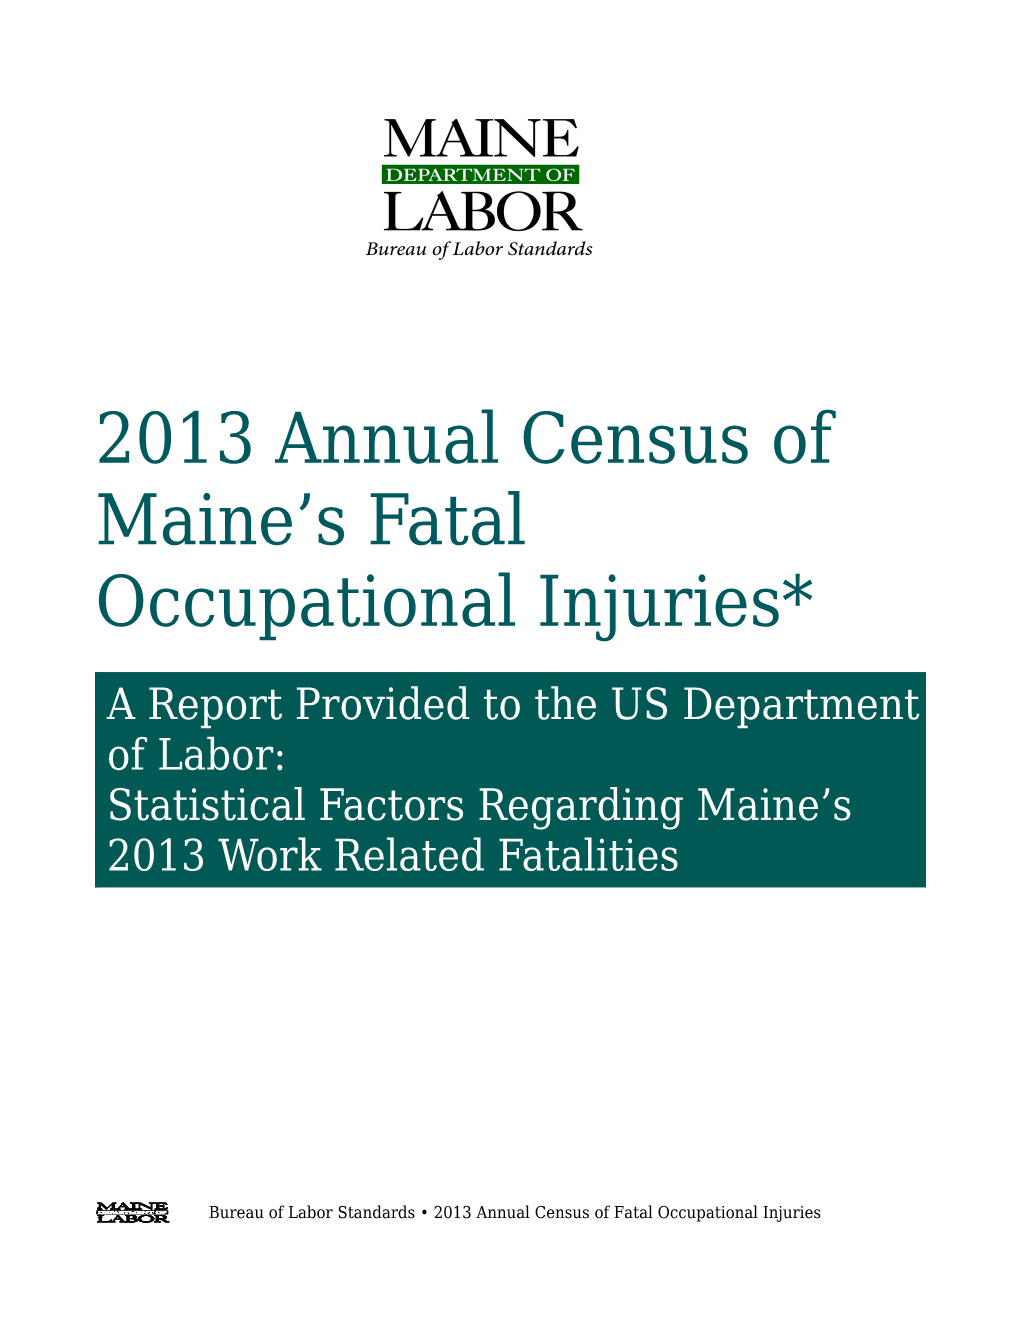 2013 Annual Census of Maine's Fatal Occupational Injuries